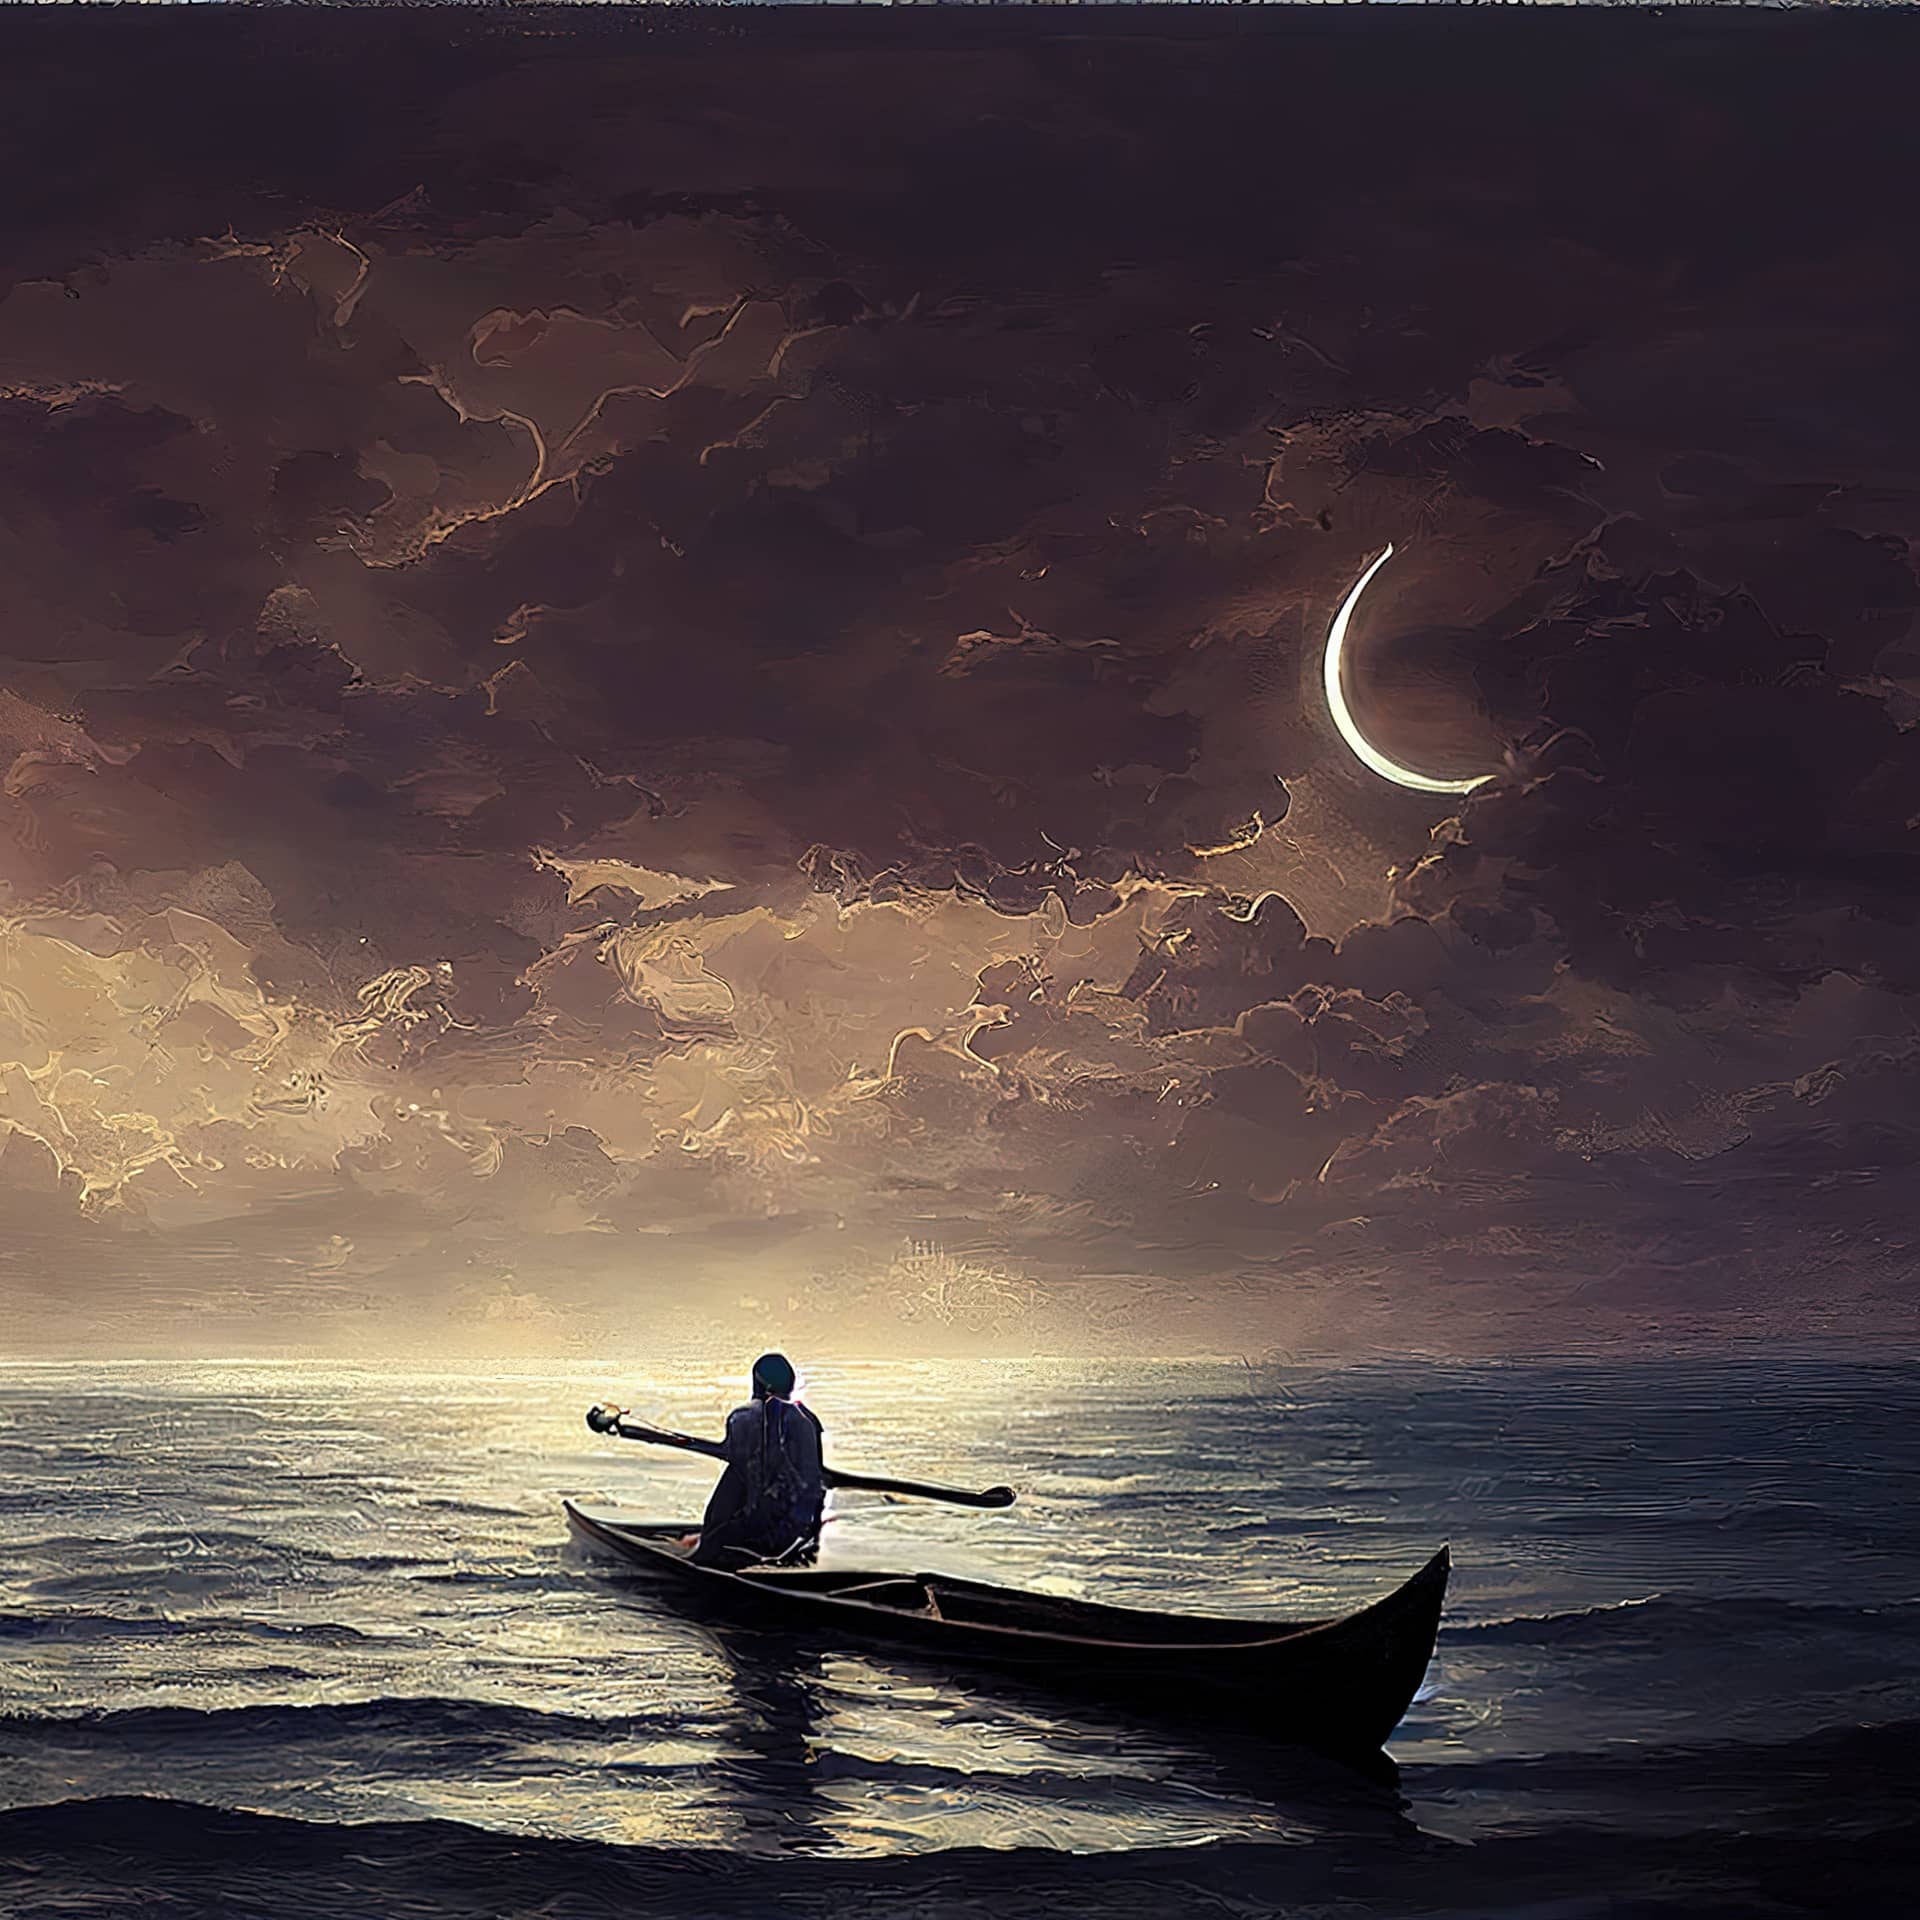 Boat sea looking crescent moon cloudy night sky 3d illustration